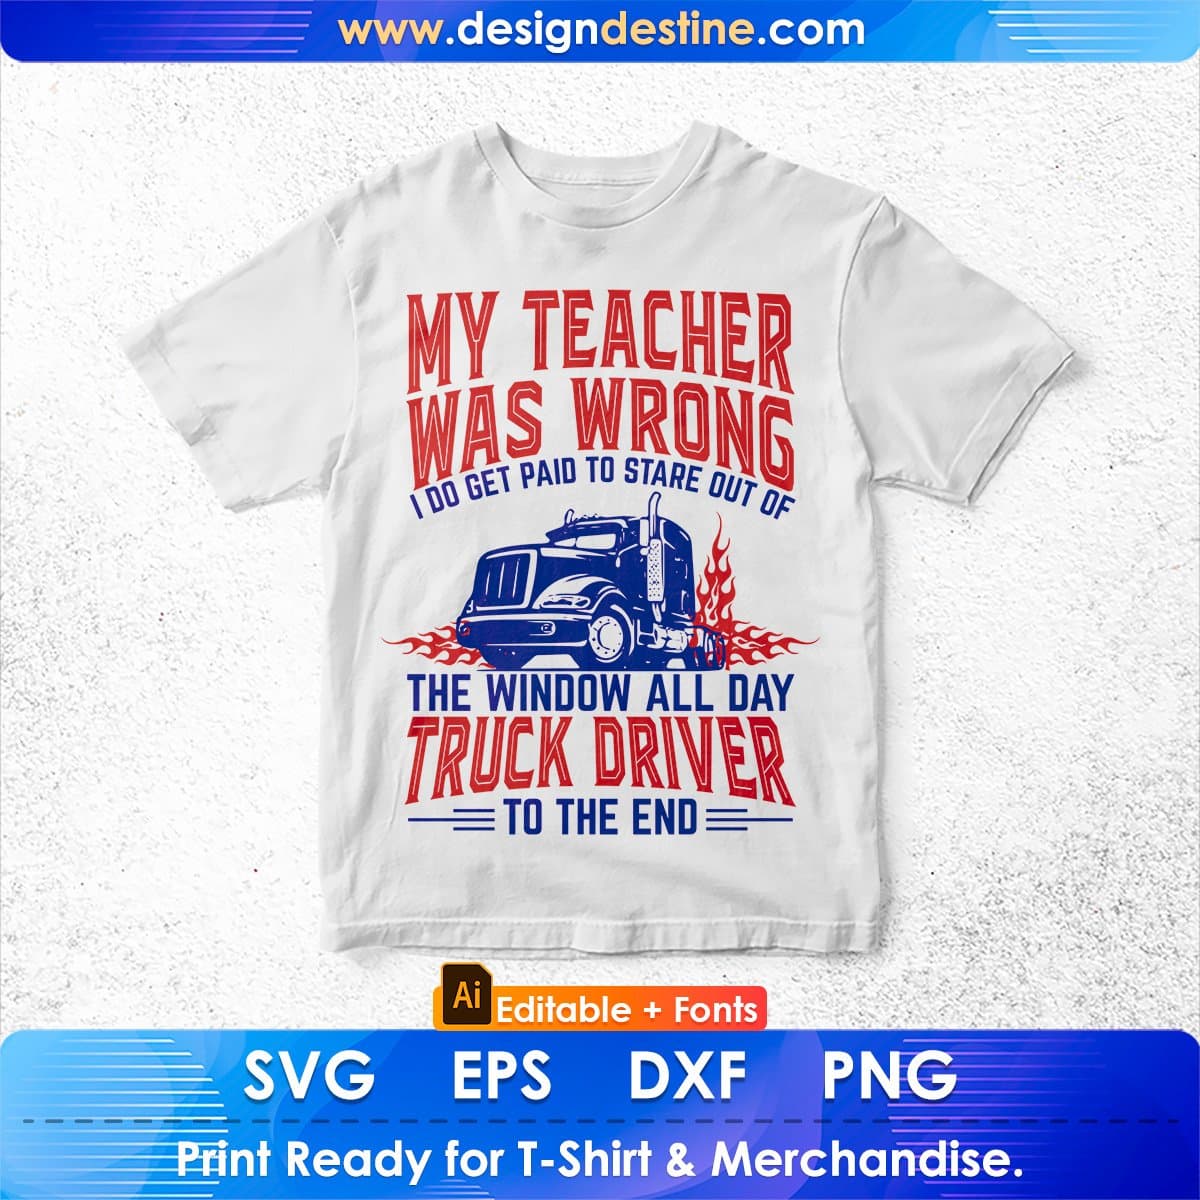 My Teacher Was Wrong I Do Get Paid To Stare Out Off Truck Driver Editable T shirt Design In Ai Svg Files